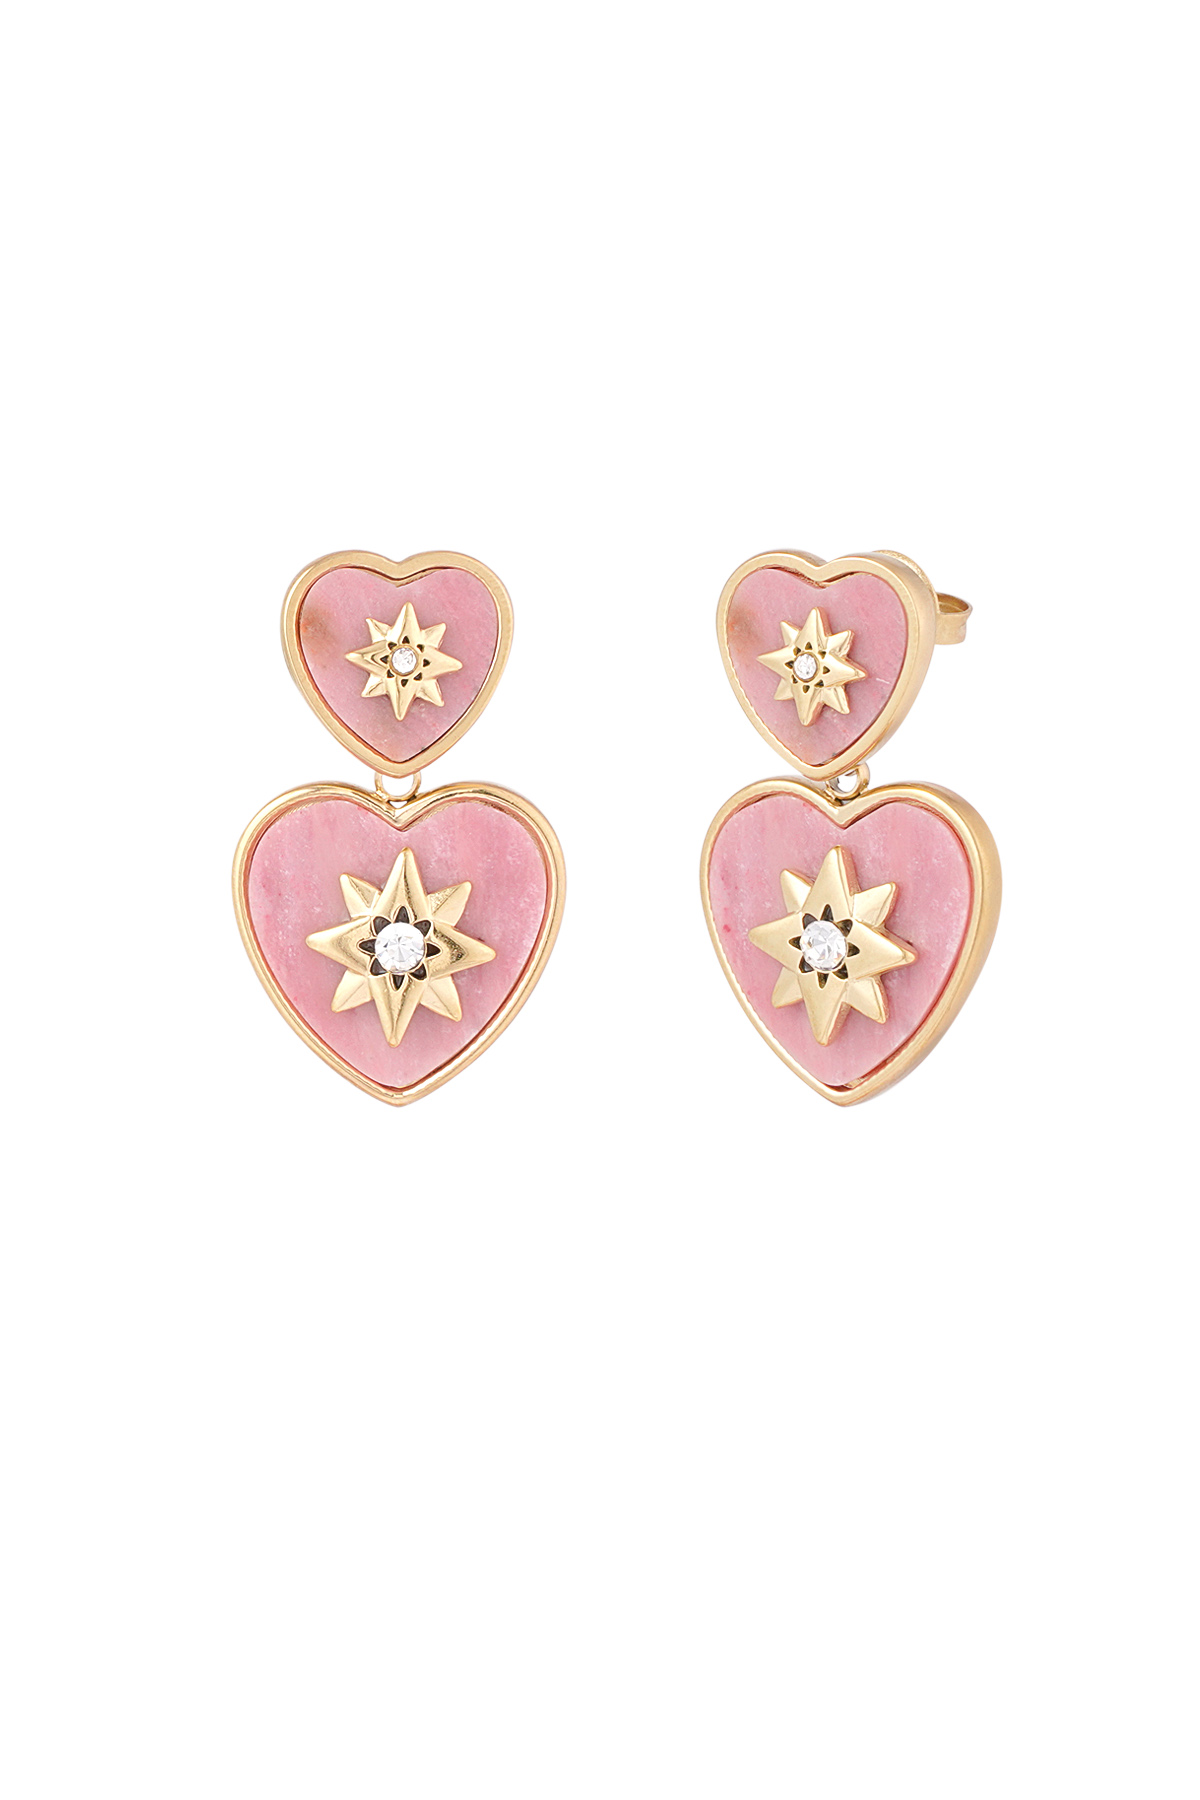 Heart earrings with compass - rose gold 